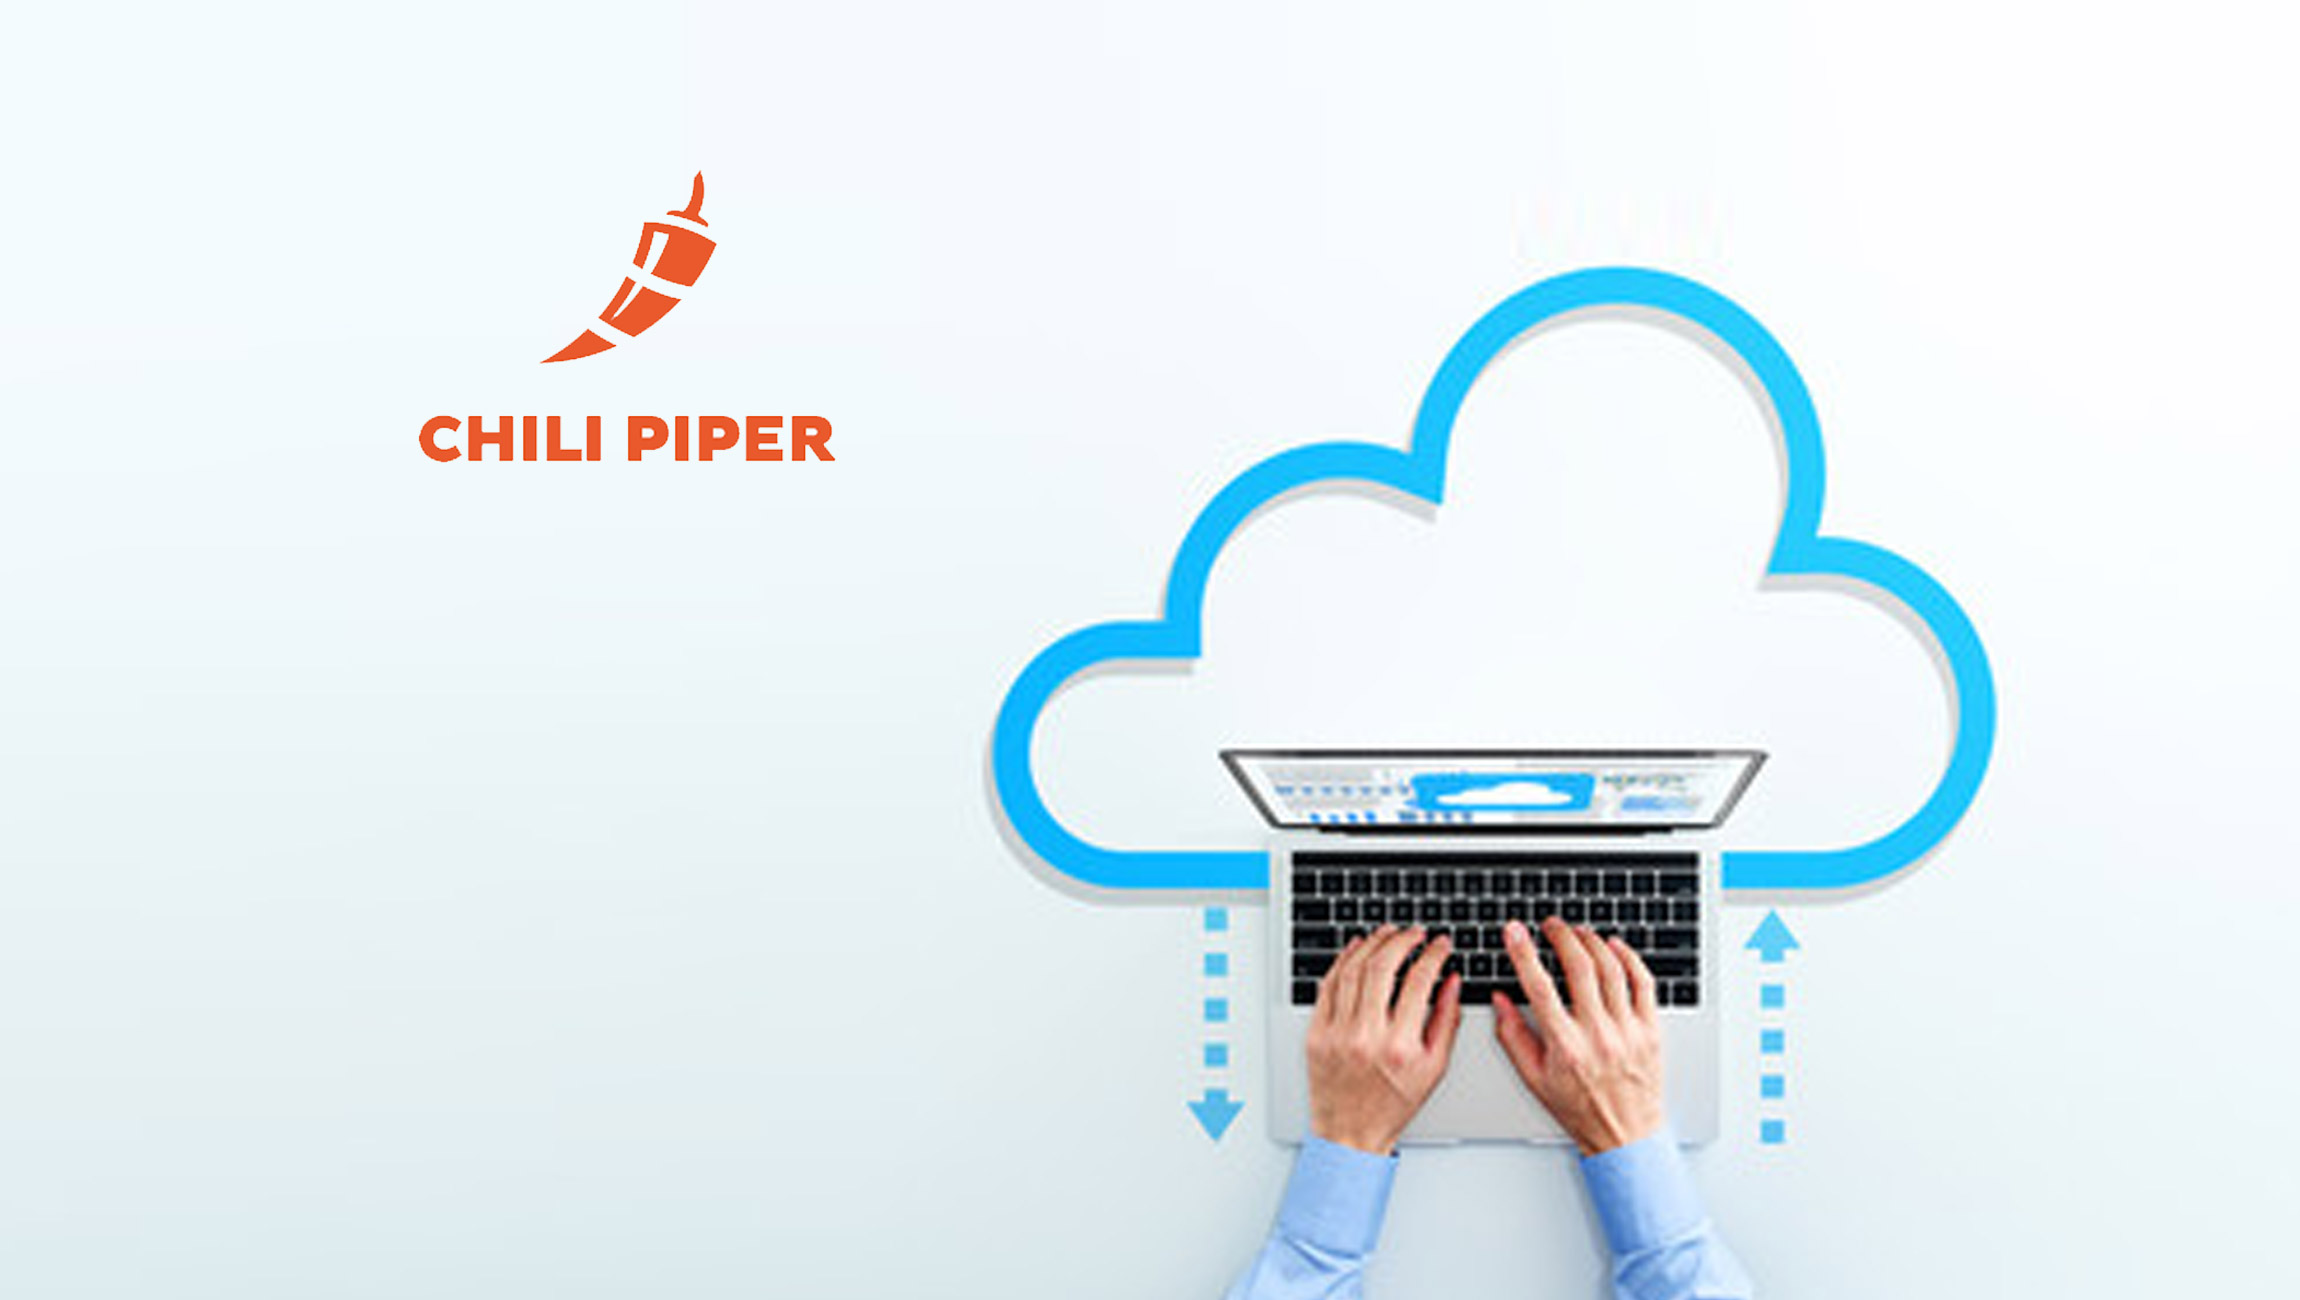 Chili Piper Launches Distro for Salesforce on Salesforce AppExchange, the World's Leading Enterprise Cloud Marketplace